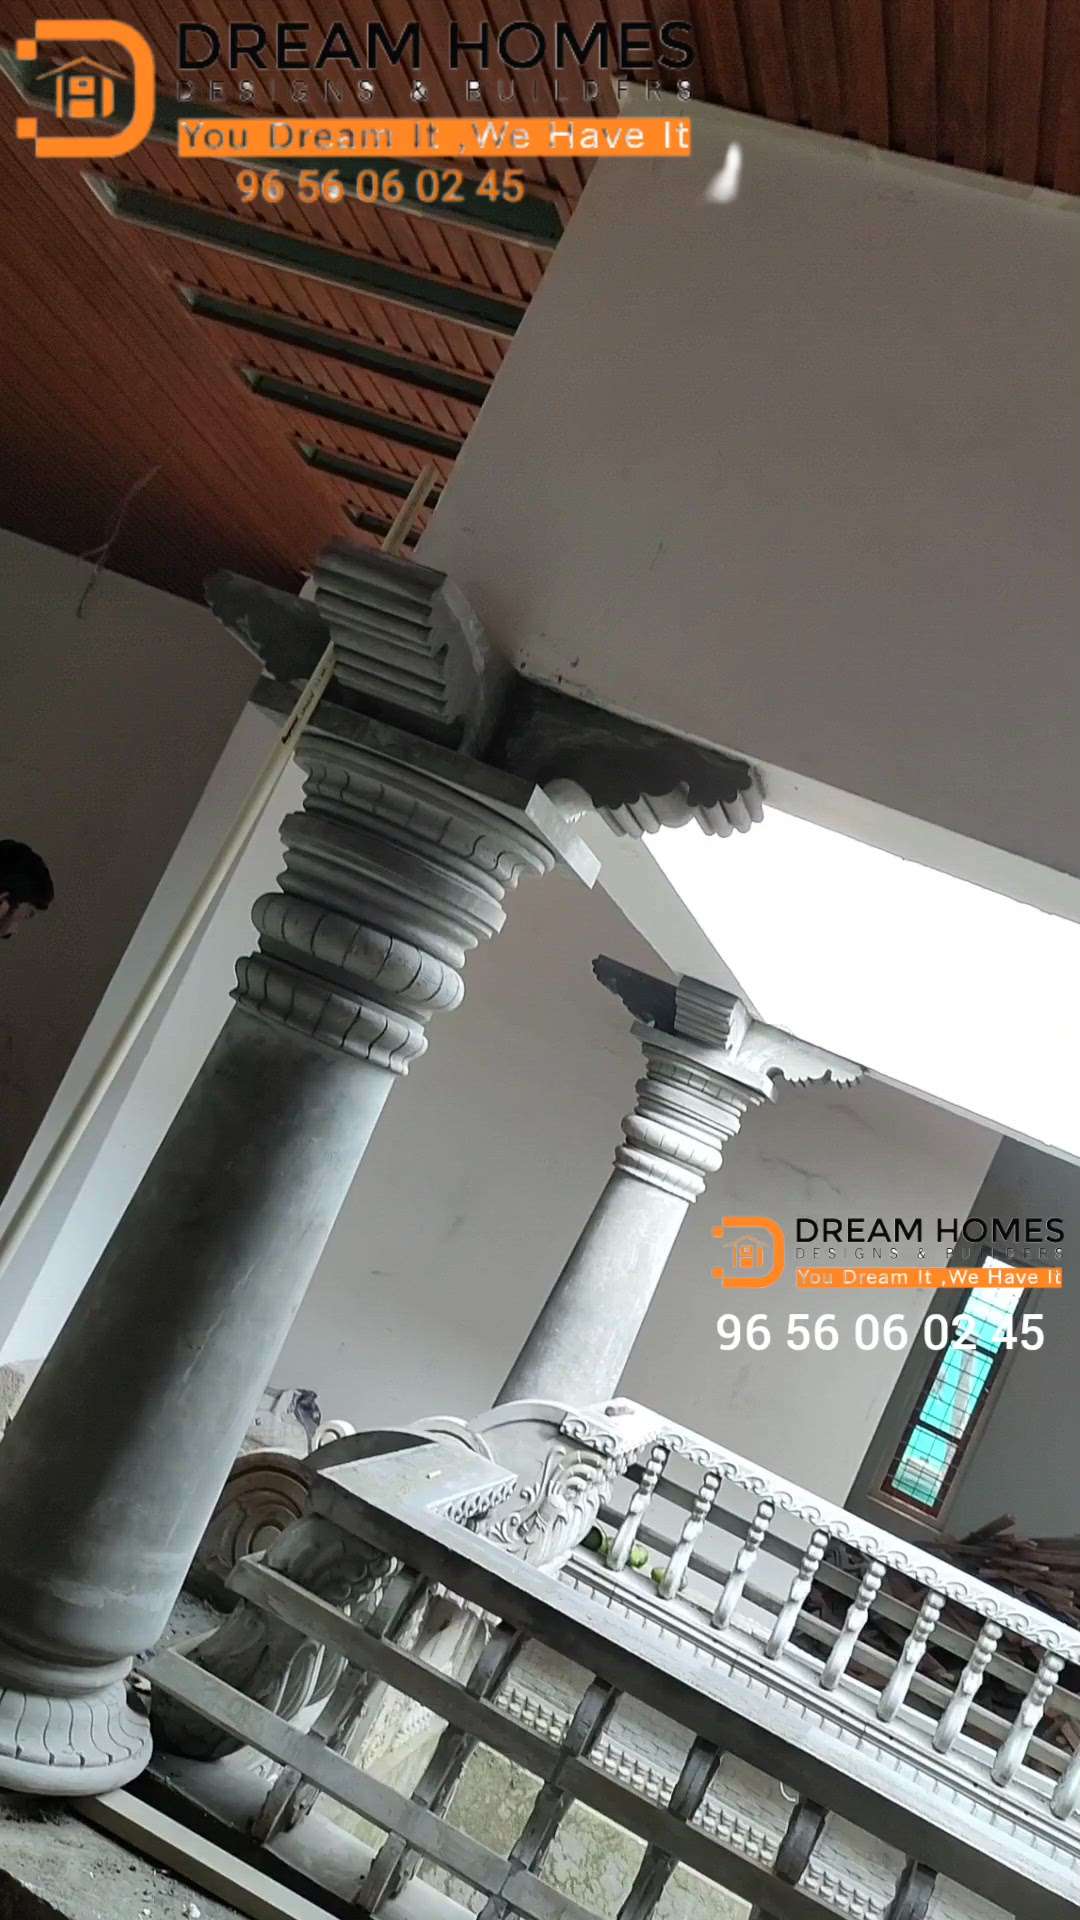 "DREAM HOMES DESIGNS & BUILDERS "
    🏡Since 1992
    You Dream It, We Have It'

      "Kerala's No 1 Architect for Traditional Homes"
       We are providing service to all over India 
No Compromise on Quality, Sincerity & Efficiency.
#traditionalhome #traditional 
www.dreamhomesbuilders.com
For more info
9656060245 (WhatsApp)
7902453187